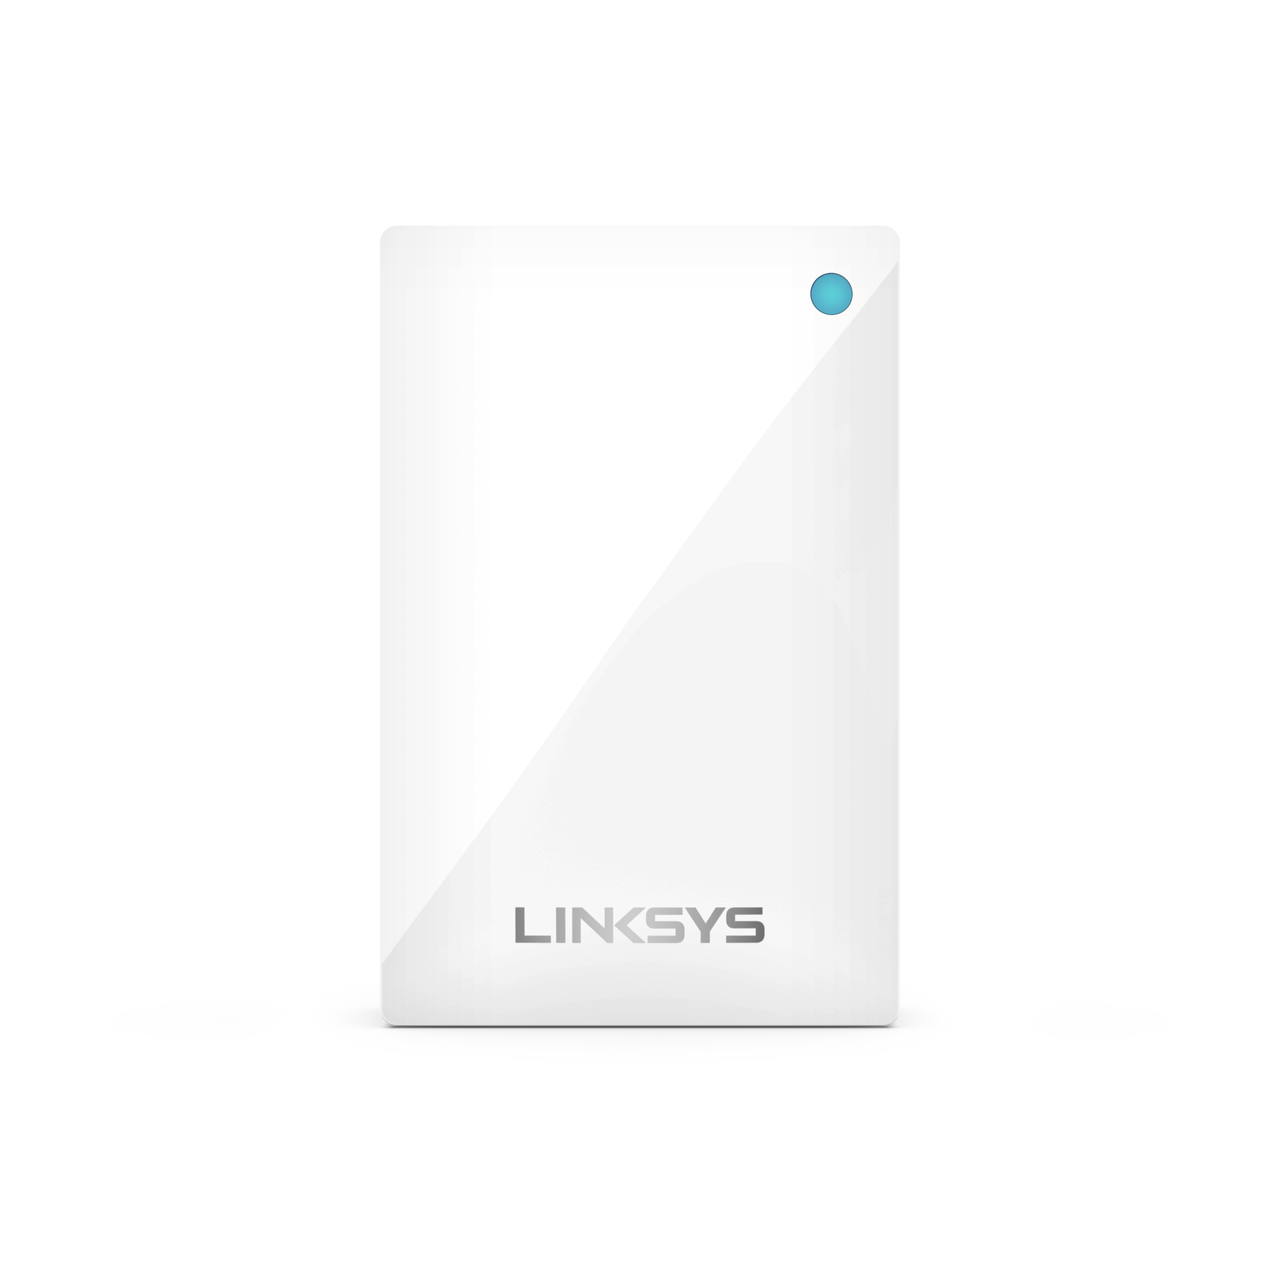 1-pack, White WiFi Router/WiFi Extender for Whole-Home Mesh Network Linksys Velop Home Mesh WiFi System 